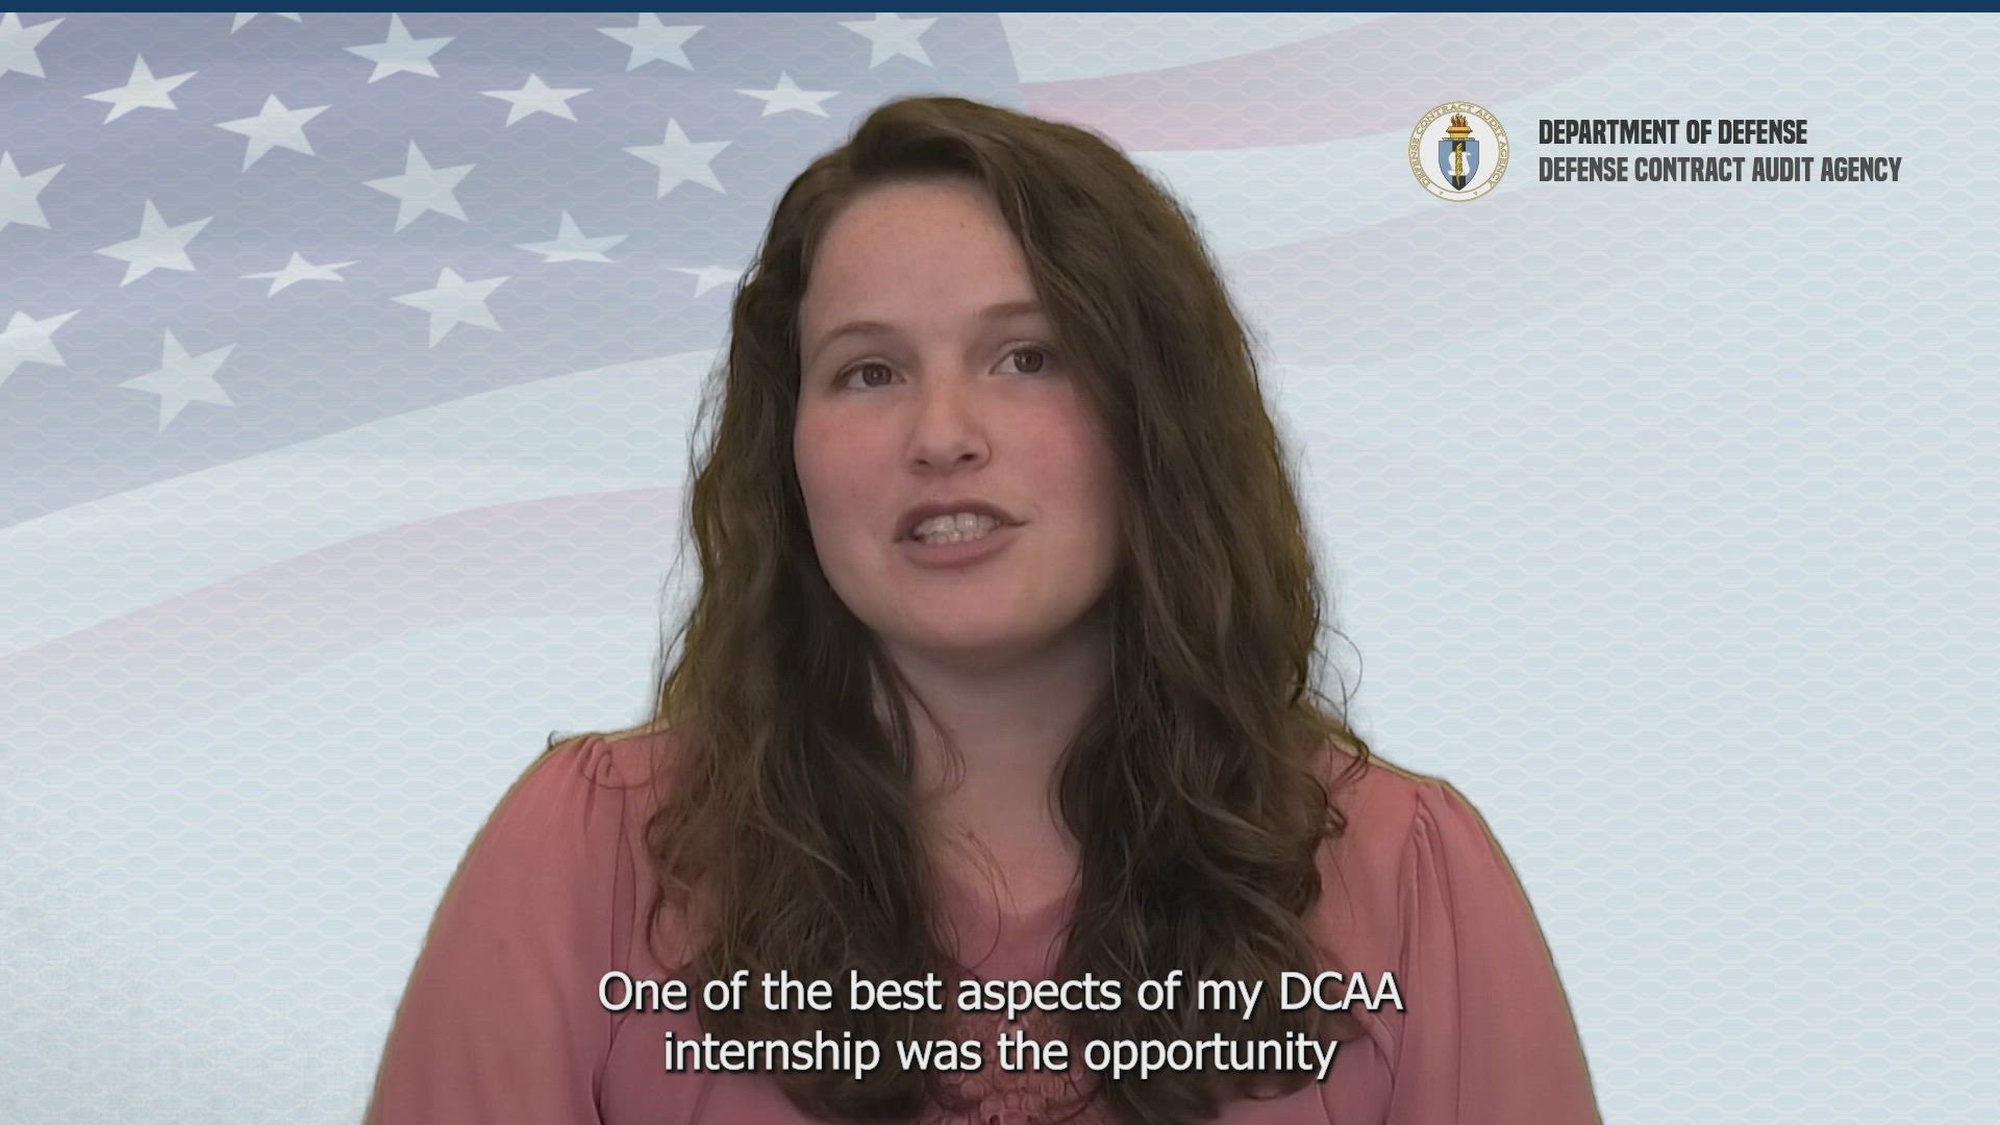 Former DCAA Intern talks about how easy it was to convert from an intern to a full time employee.